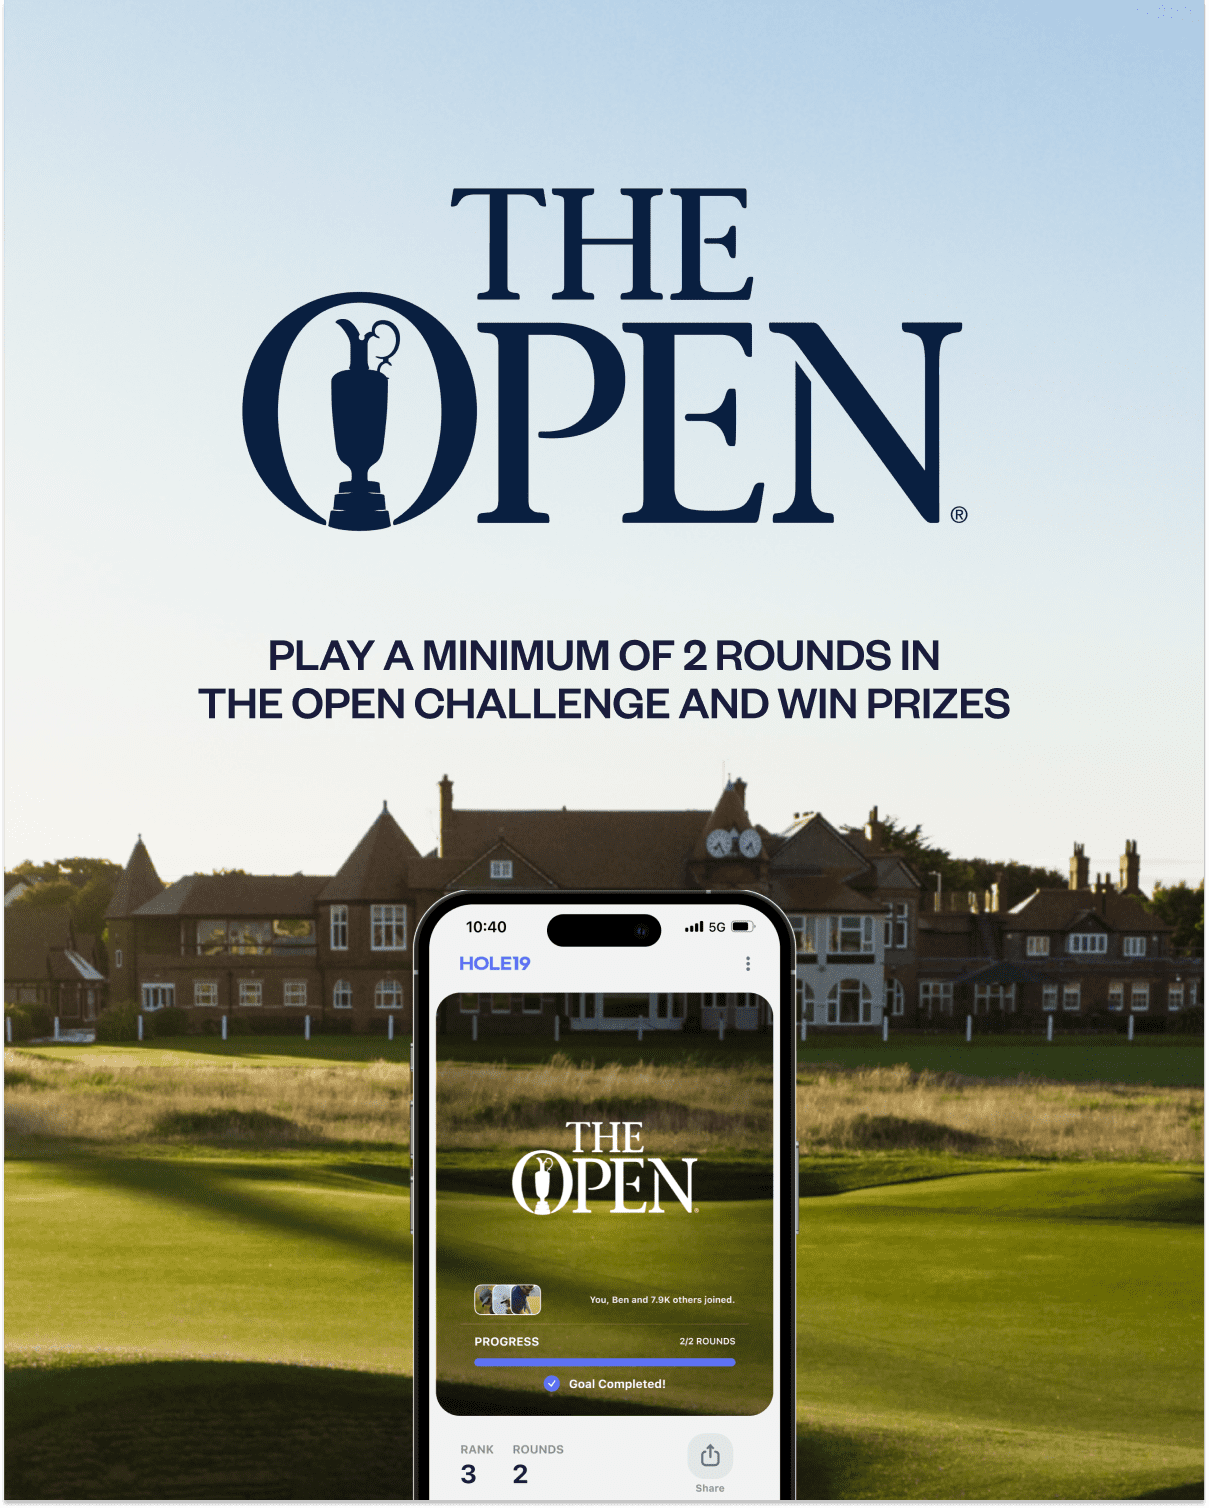 The Open Championship - A Glimpse into Royal Liverpool